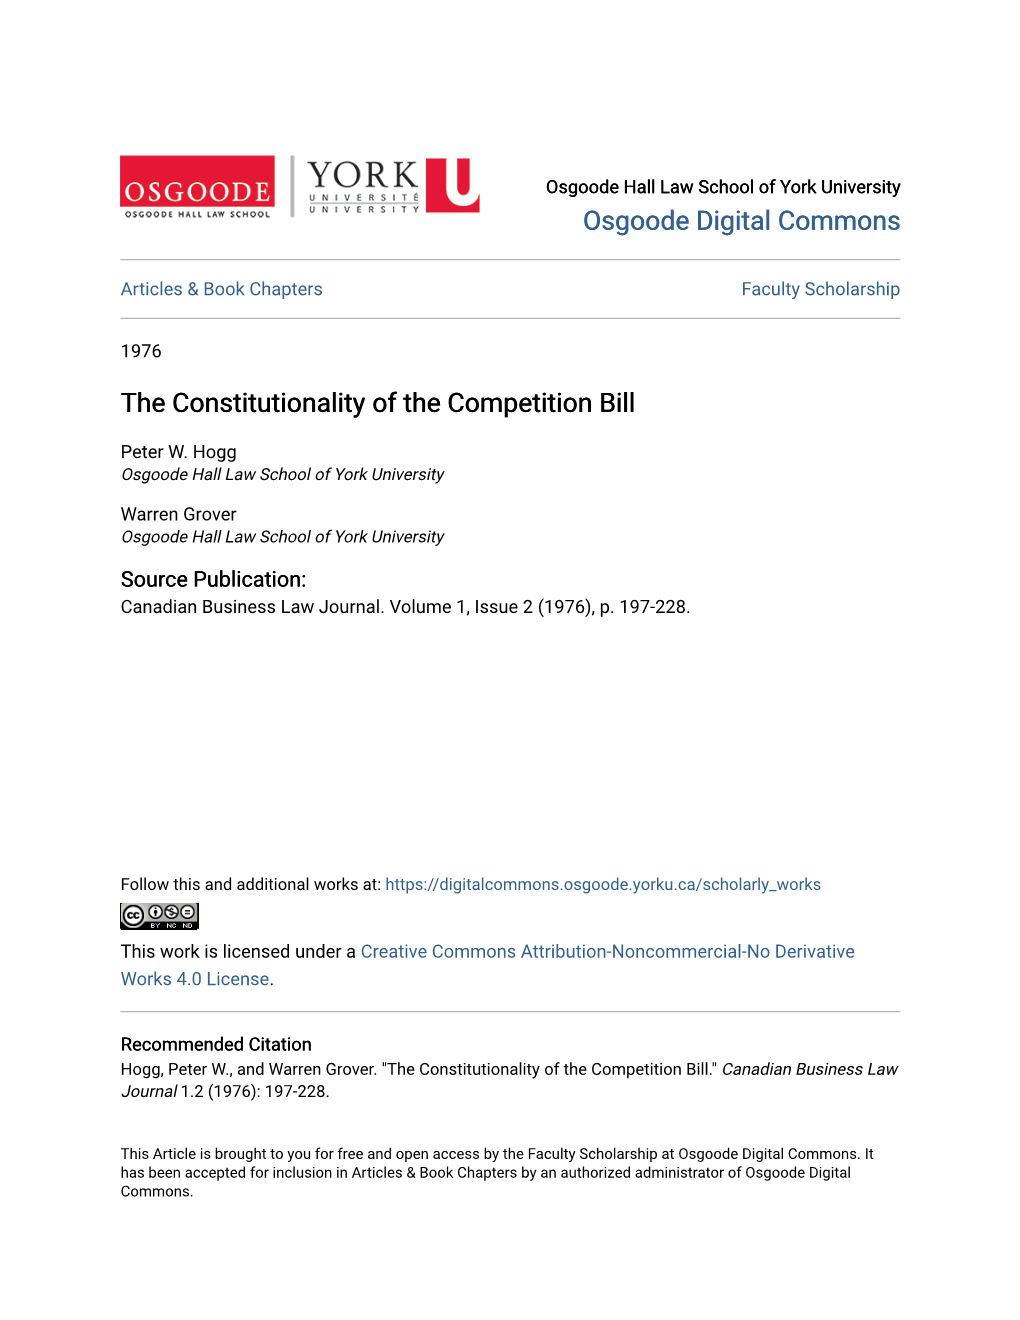 The Constitutionality of the Competition Bill